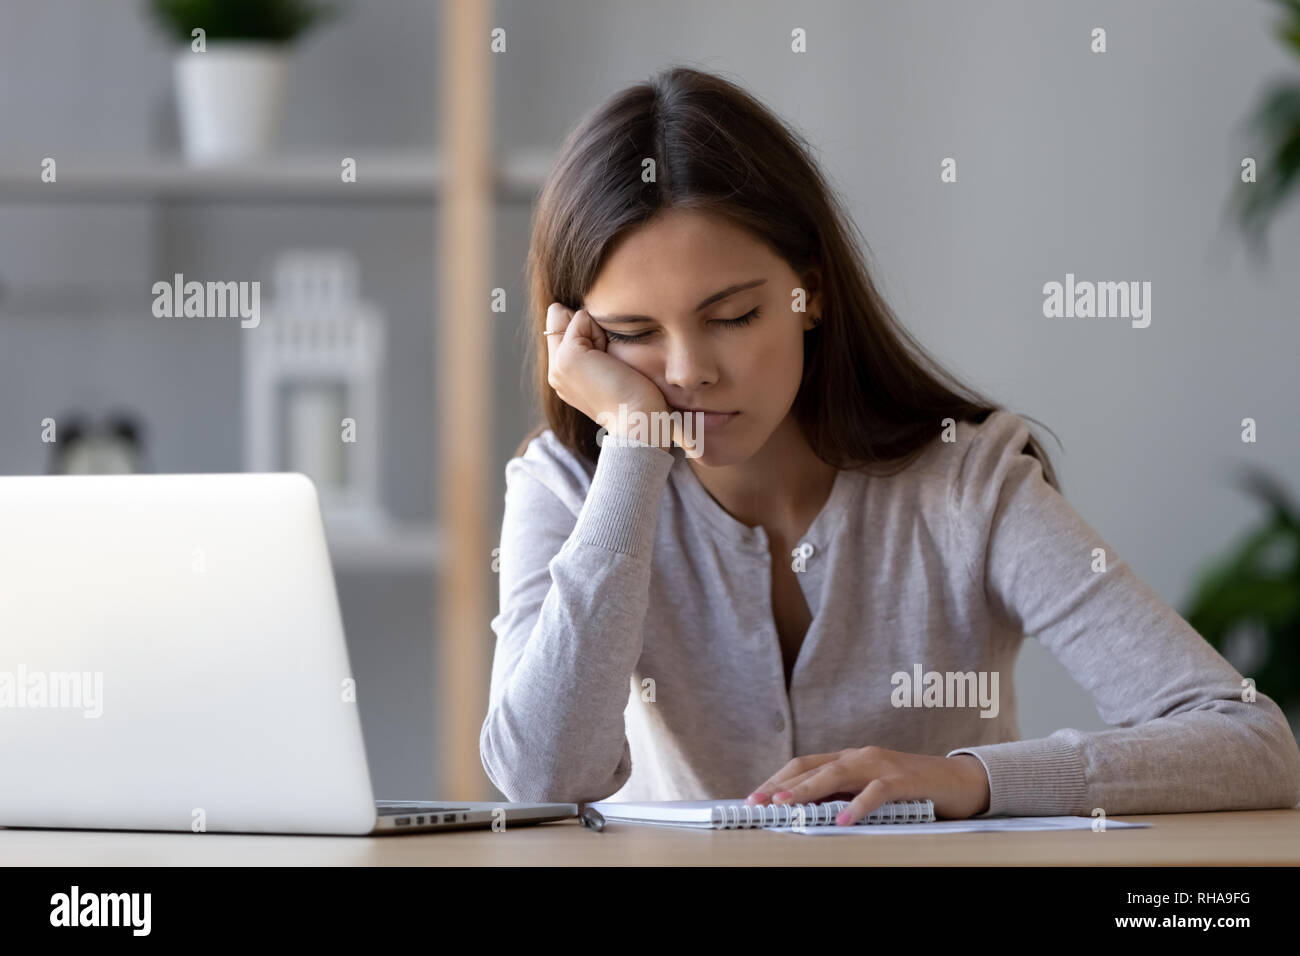 Bored funny woman resting on hand sleeping at workplace Stock Photo